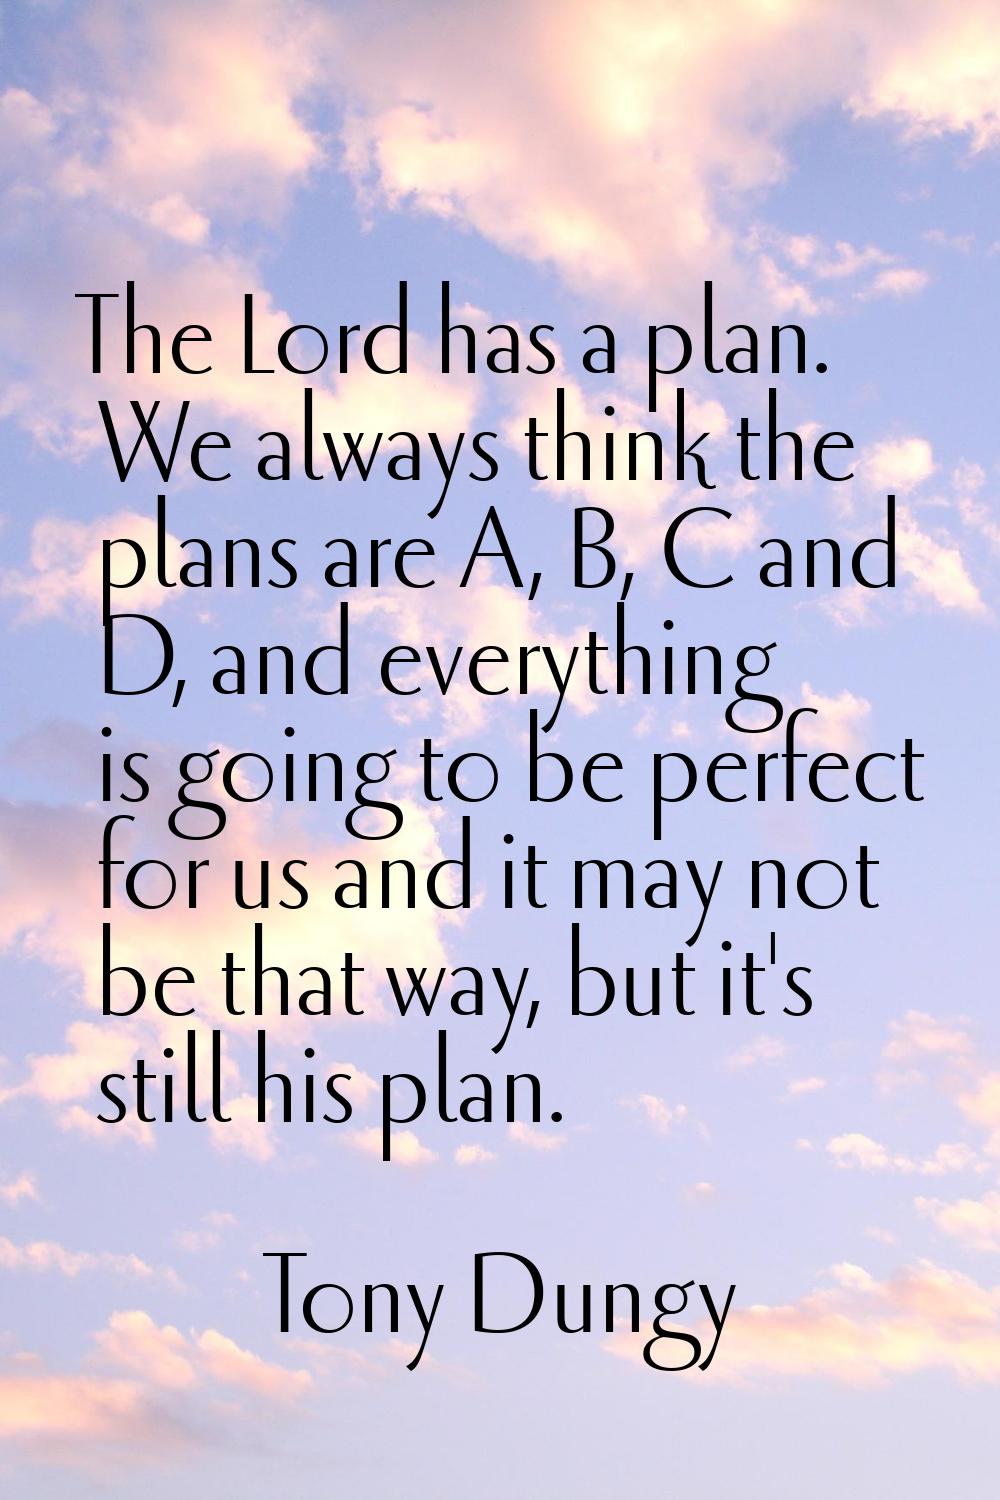 The Lord has a plan. We always think the plans are A, B, C and D, and everything is going to be per